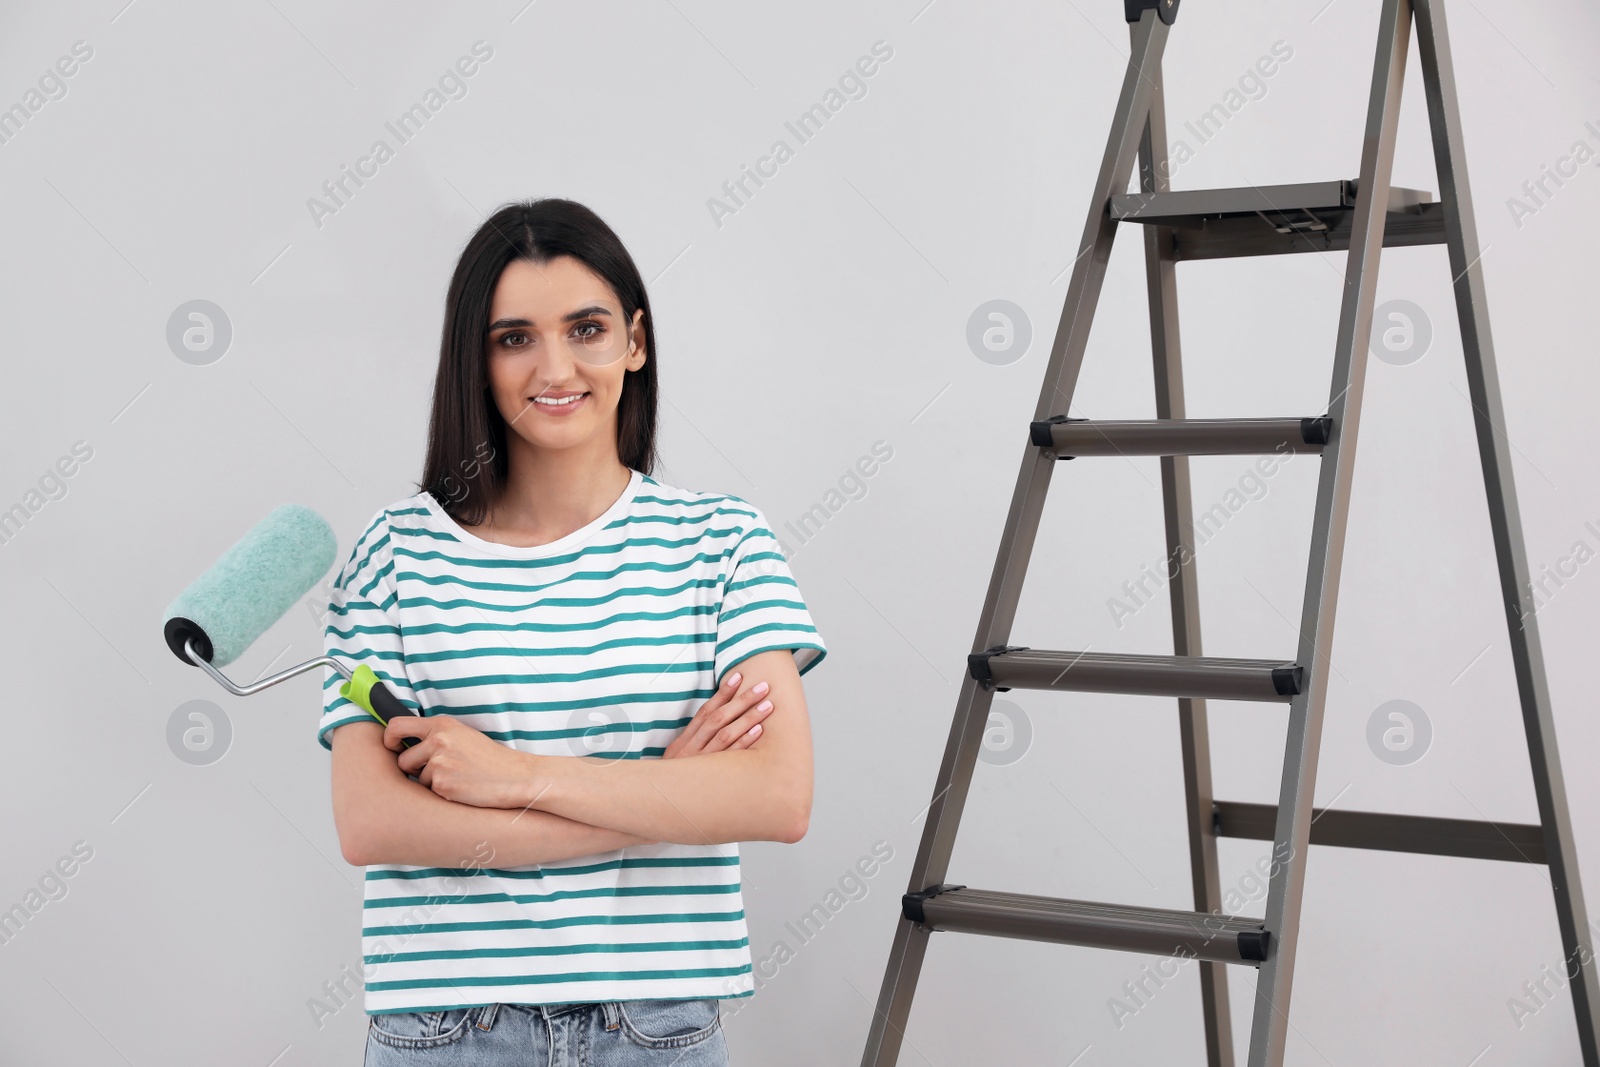 Photo of Young woman with roller and ladder near light wall